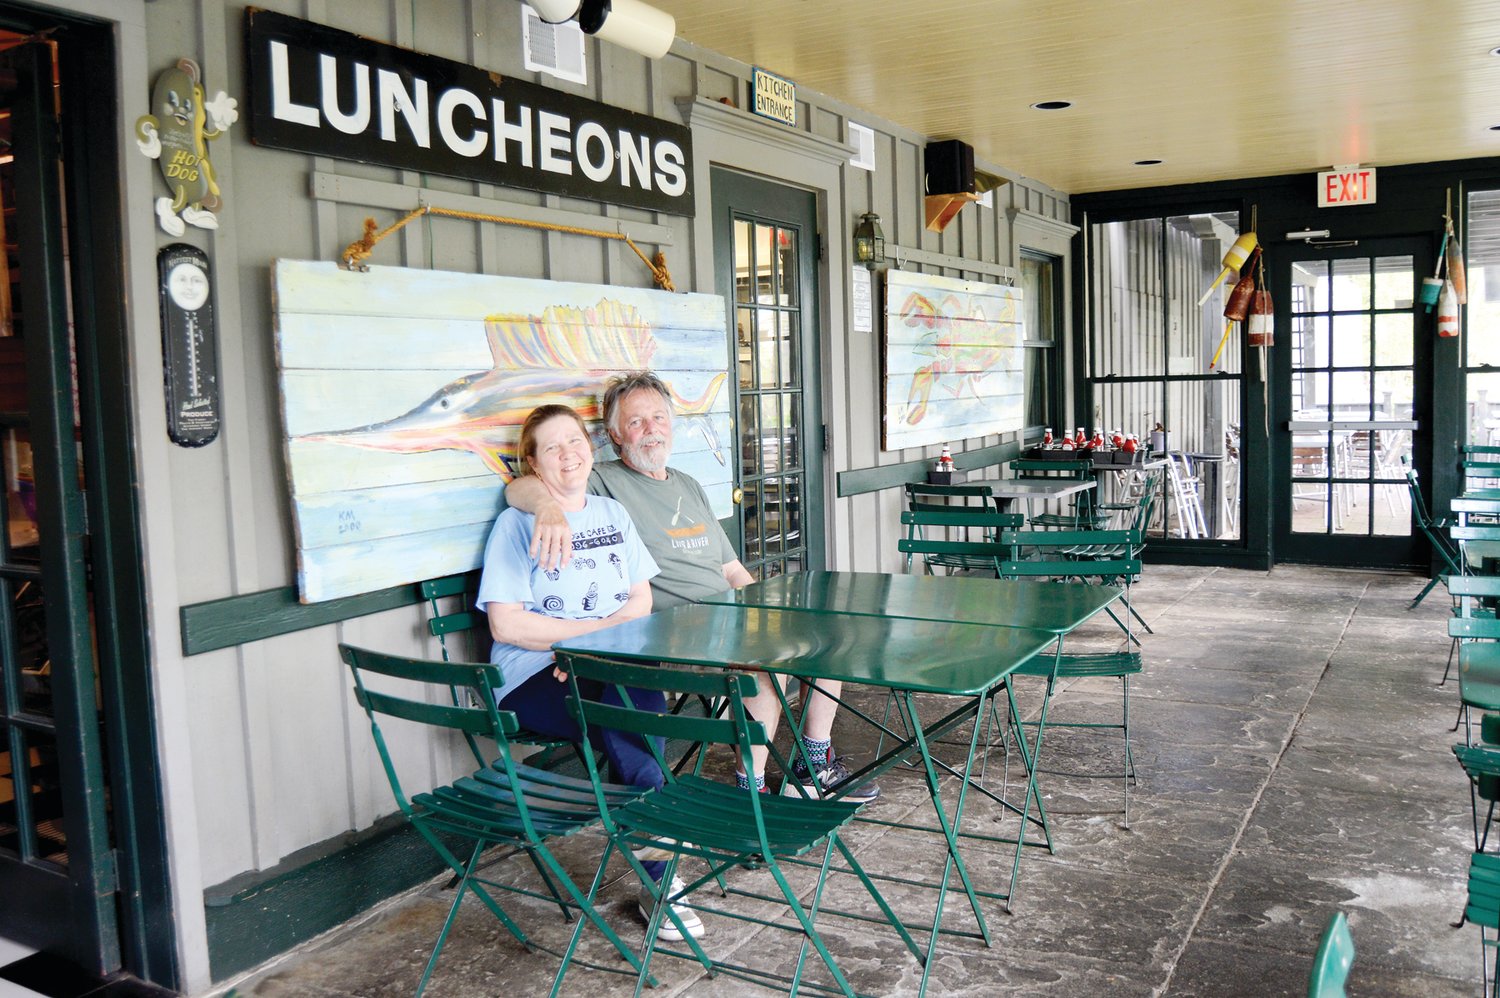 Lisa and Ken Miller have been operating the Bridge Café in Frenchtown, N.J. for nearly 32 years. Photograph by Susan S. Yeske.